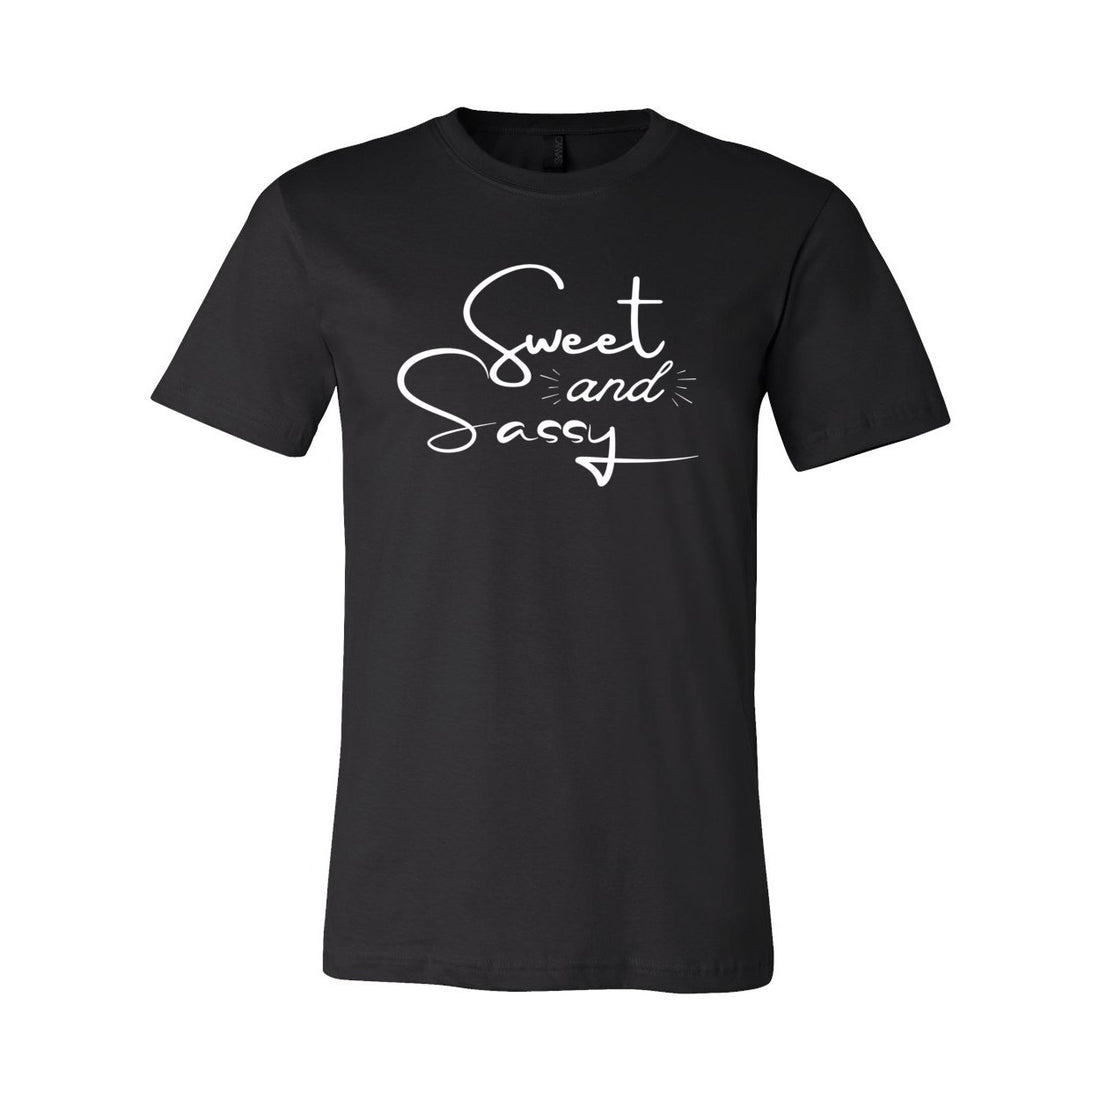 Sweet N Sassy Jersey Tee - T-Shirts - Positively Sassy - Sweet N Sassy Jersey Tee